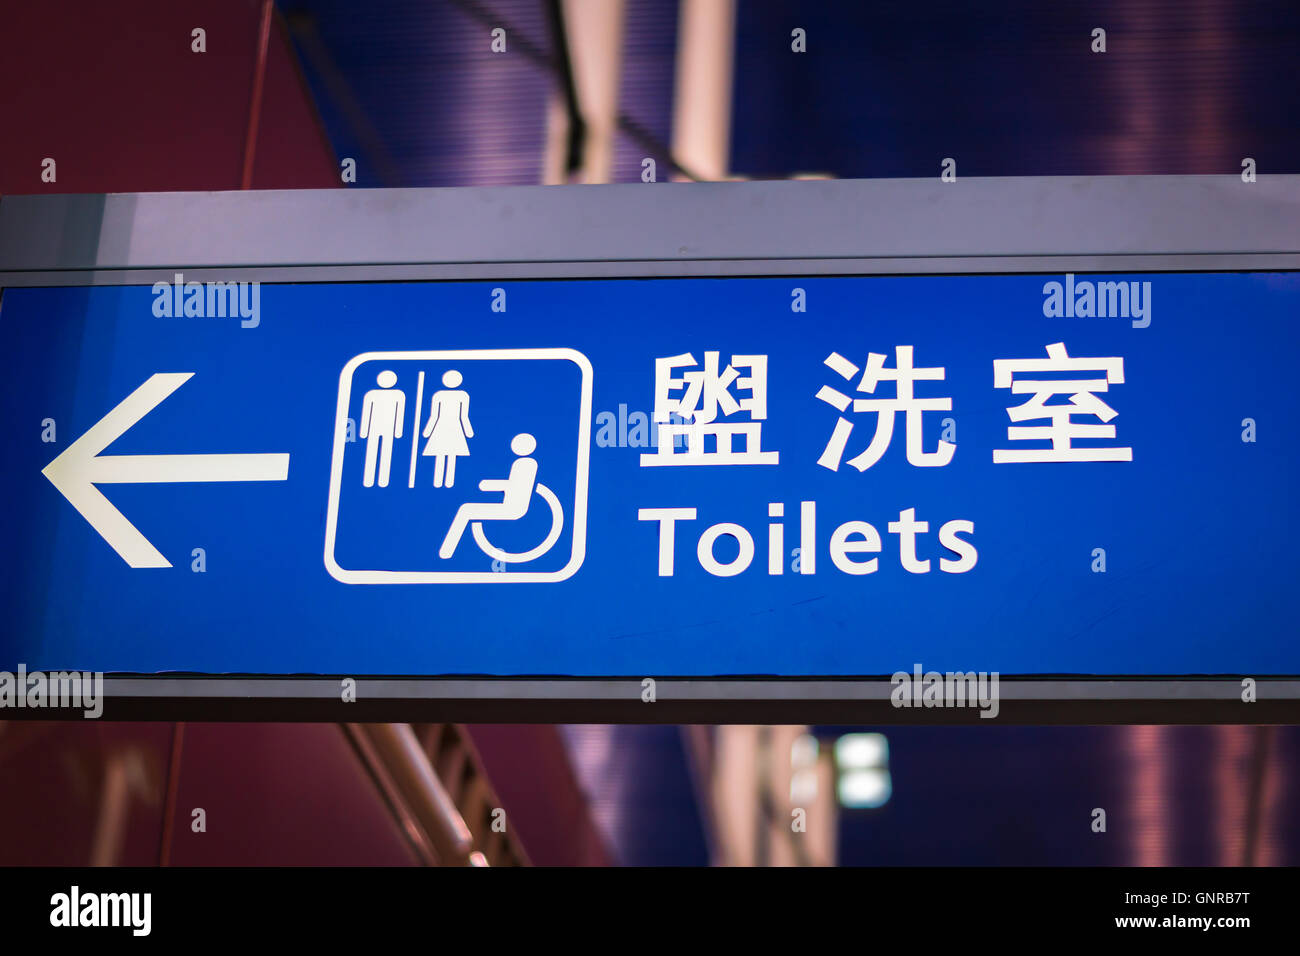 Toilet sign and icon for men, women and disabled, in English and Chinese at airport Stock Photo